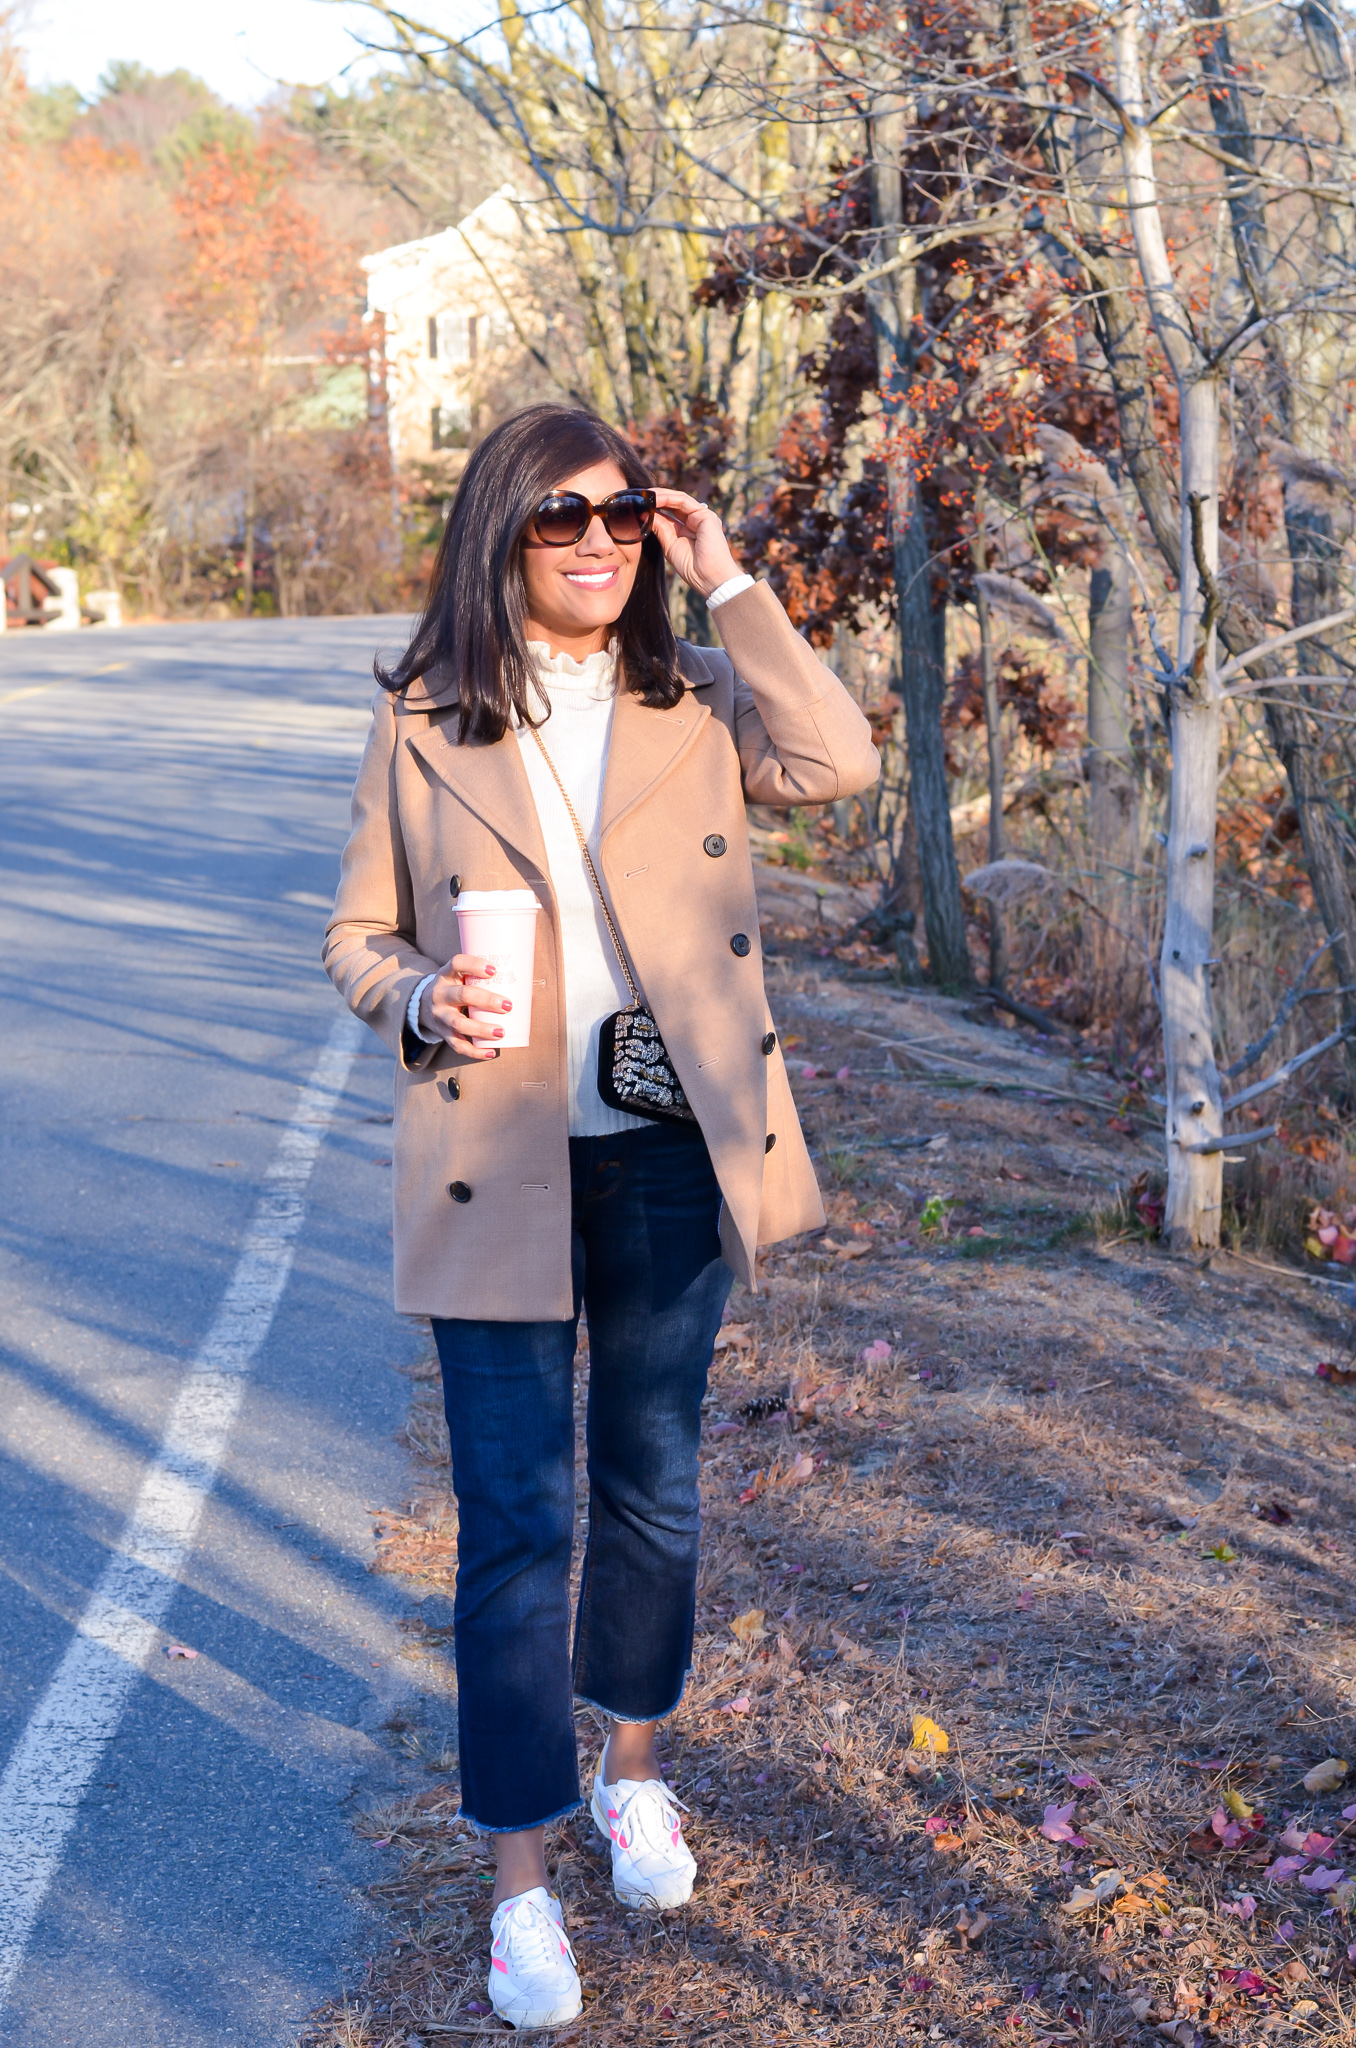 Desiree Leone of Beautifully Seaside features fall outfits to recreate this season